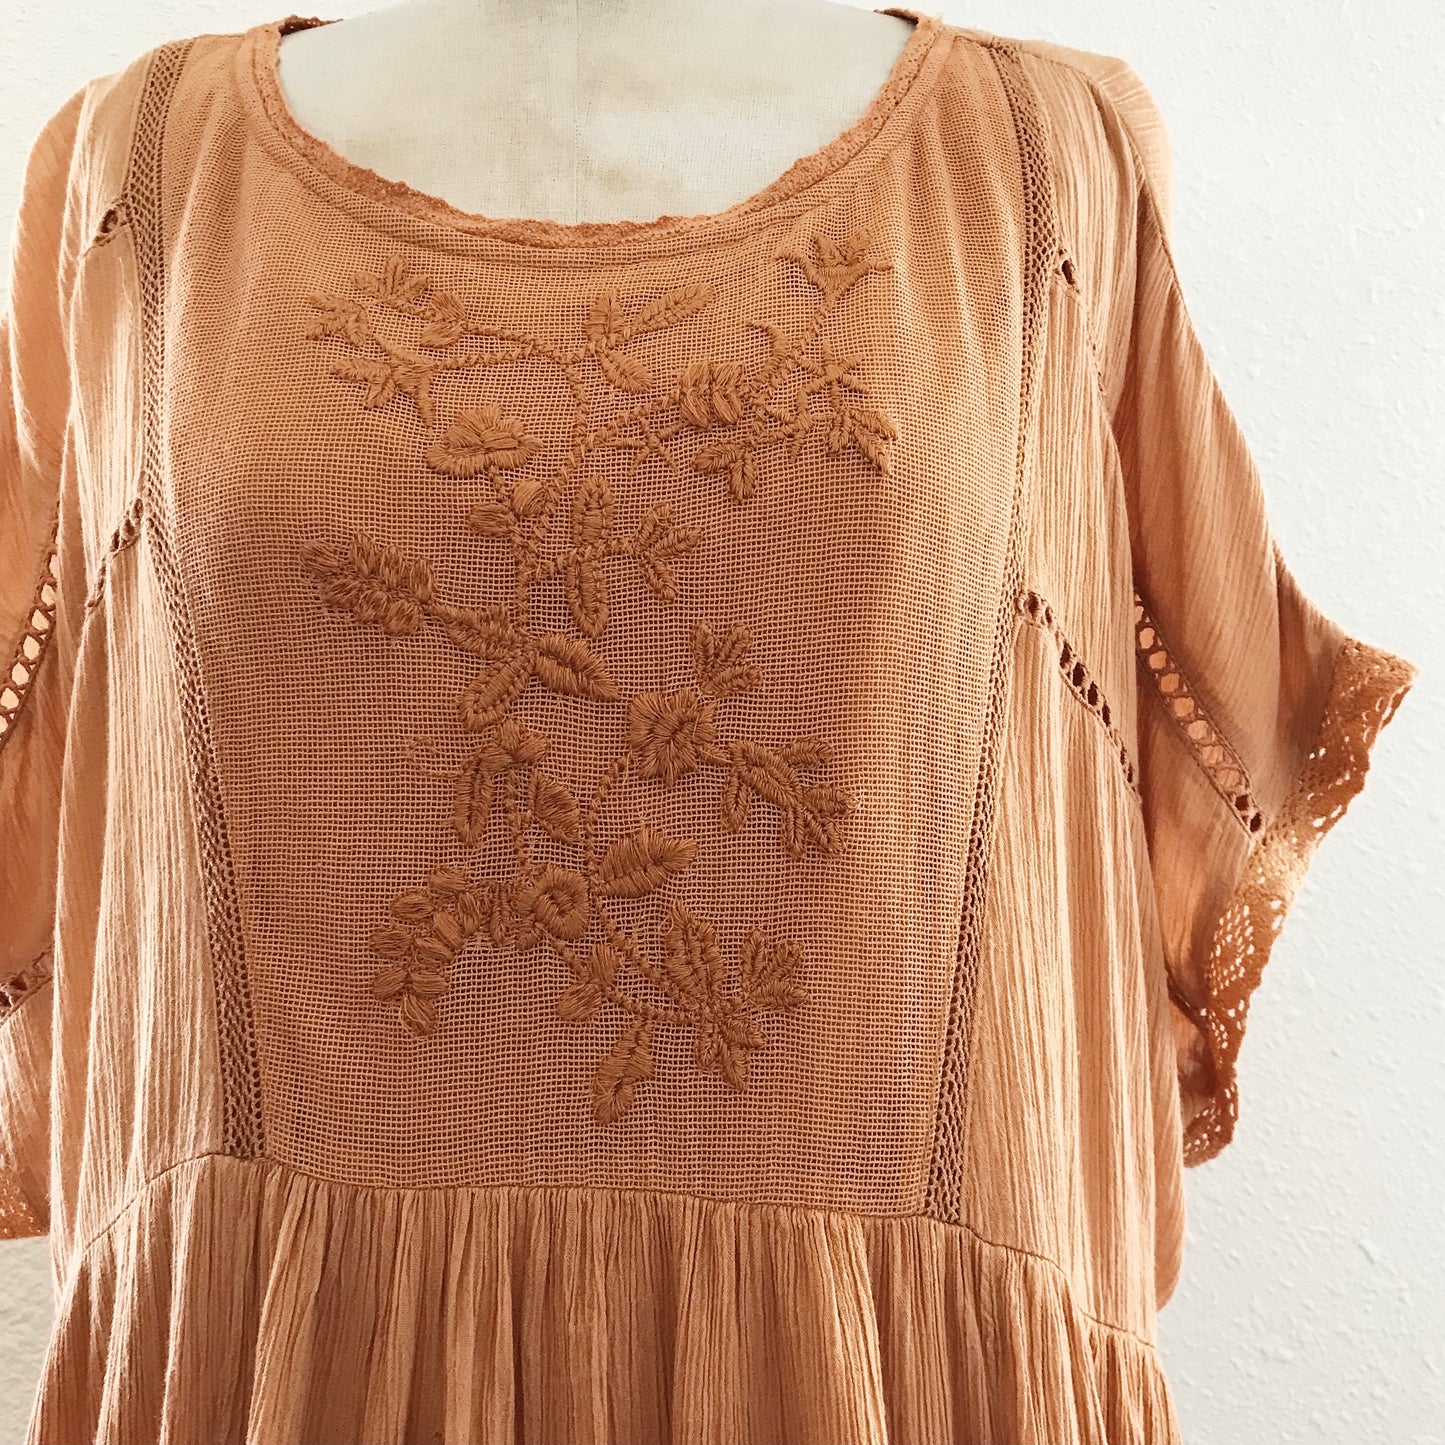 For The Republic Tan Floral Embroidered Mini Dress